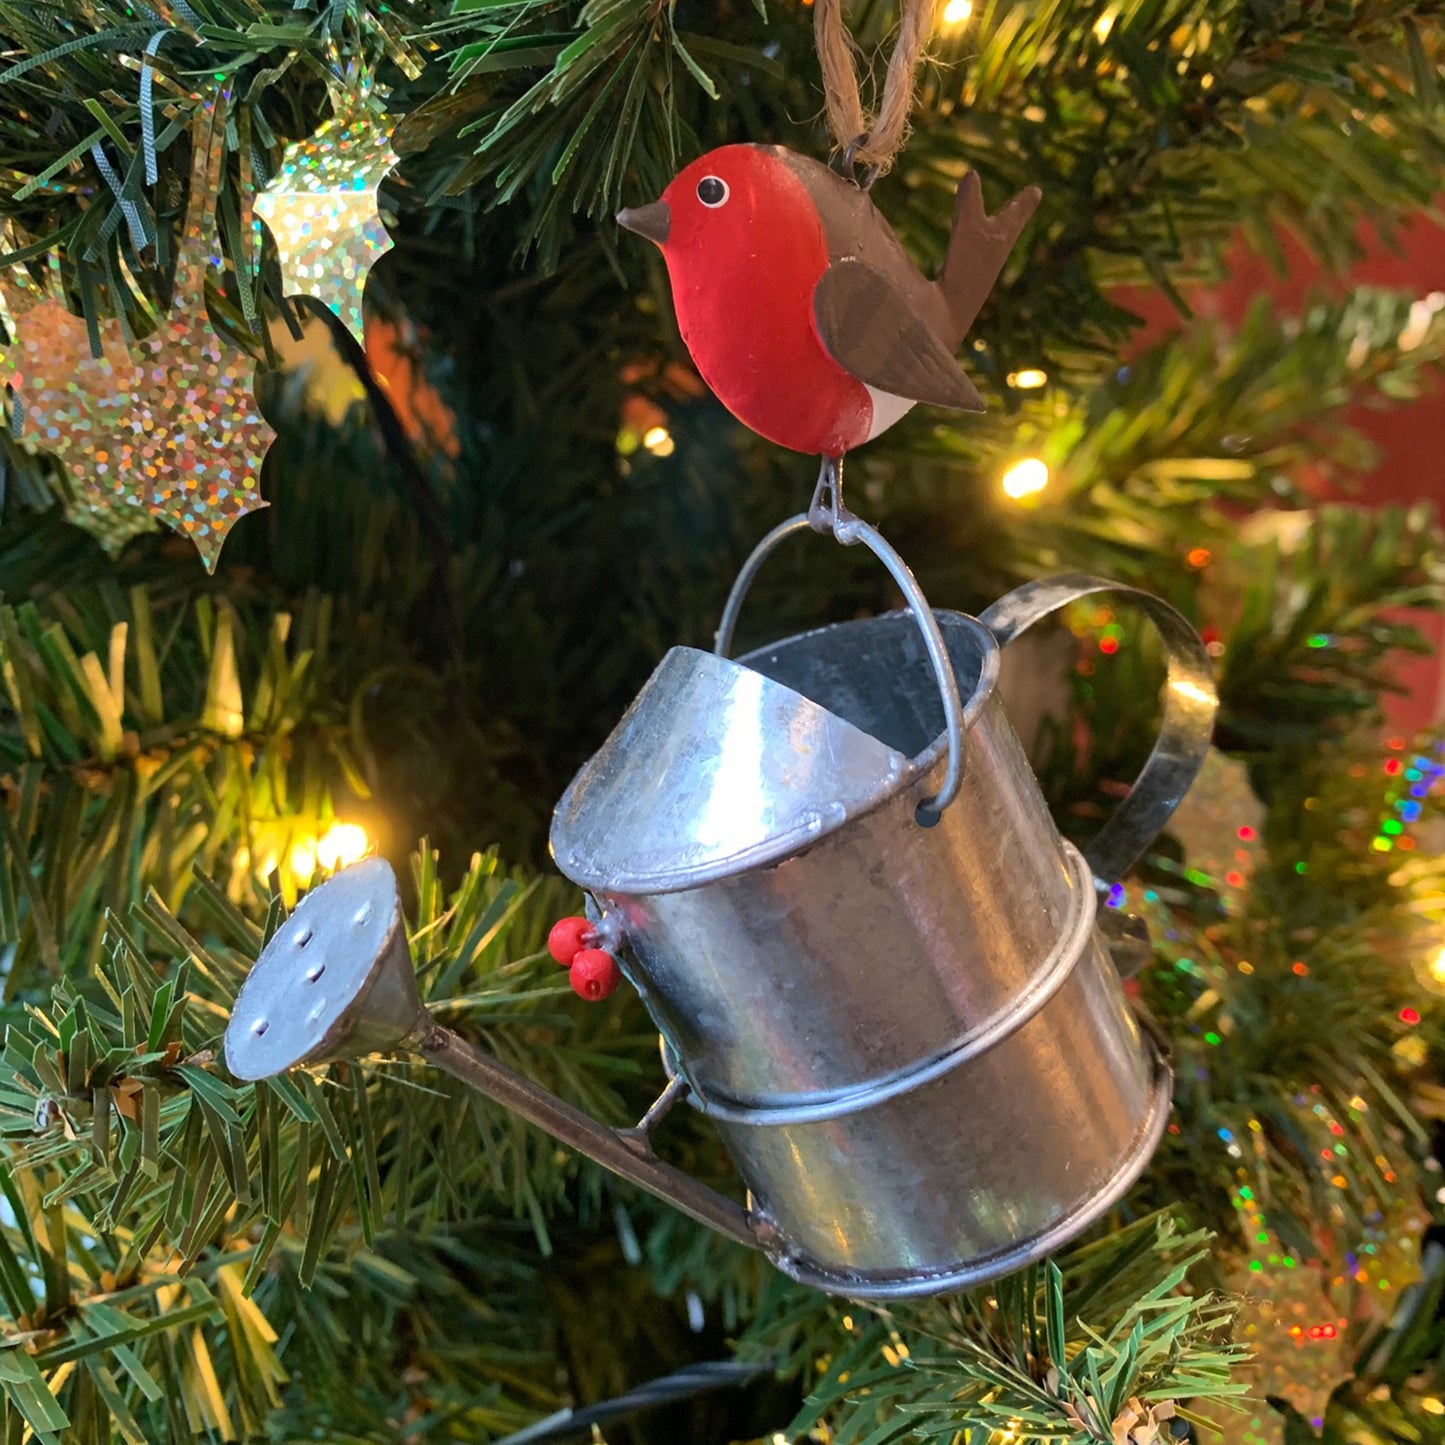 Robin on a Watering Can Hanging Christmas Decoration in a Christmas Tree  | Happy Piranha